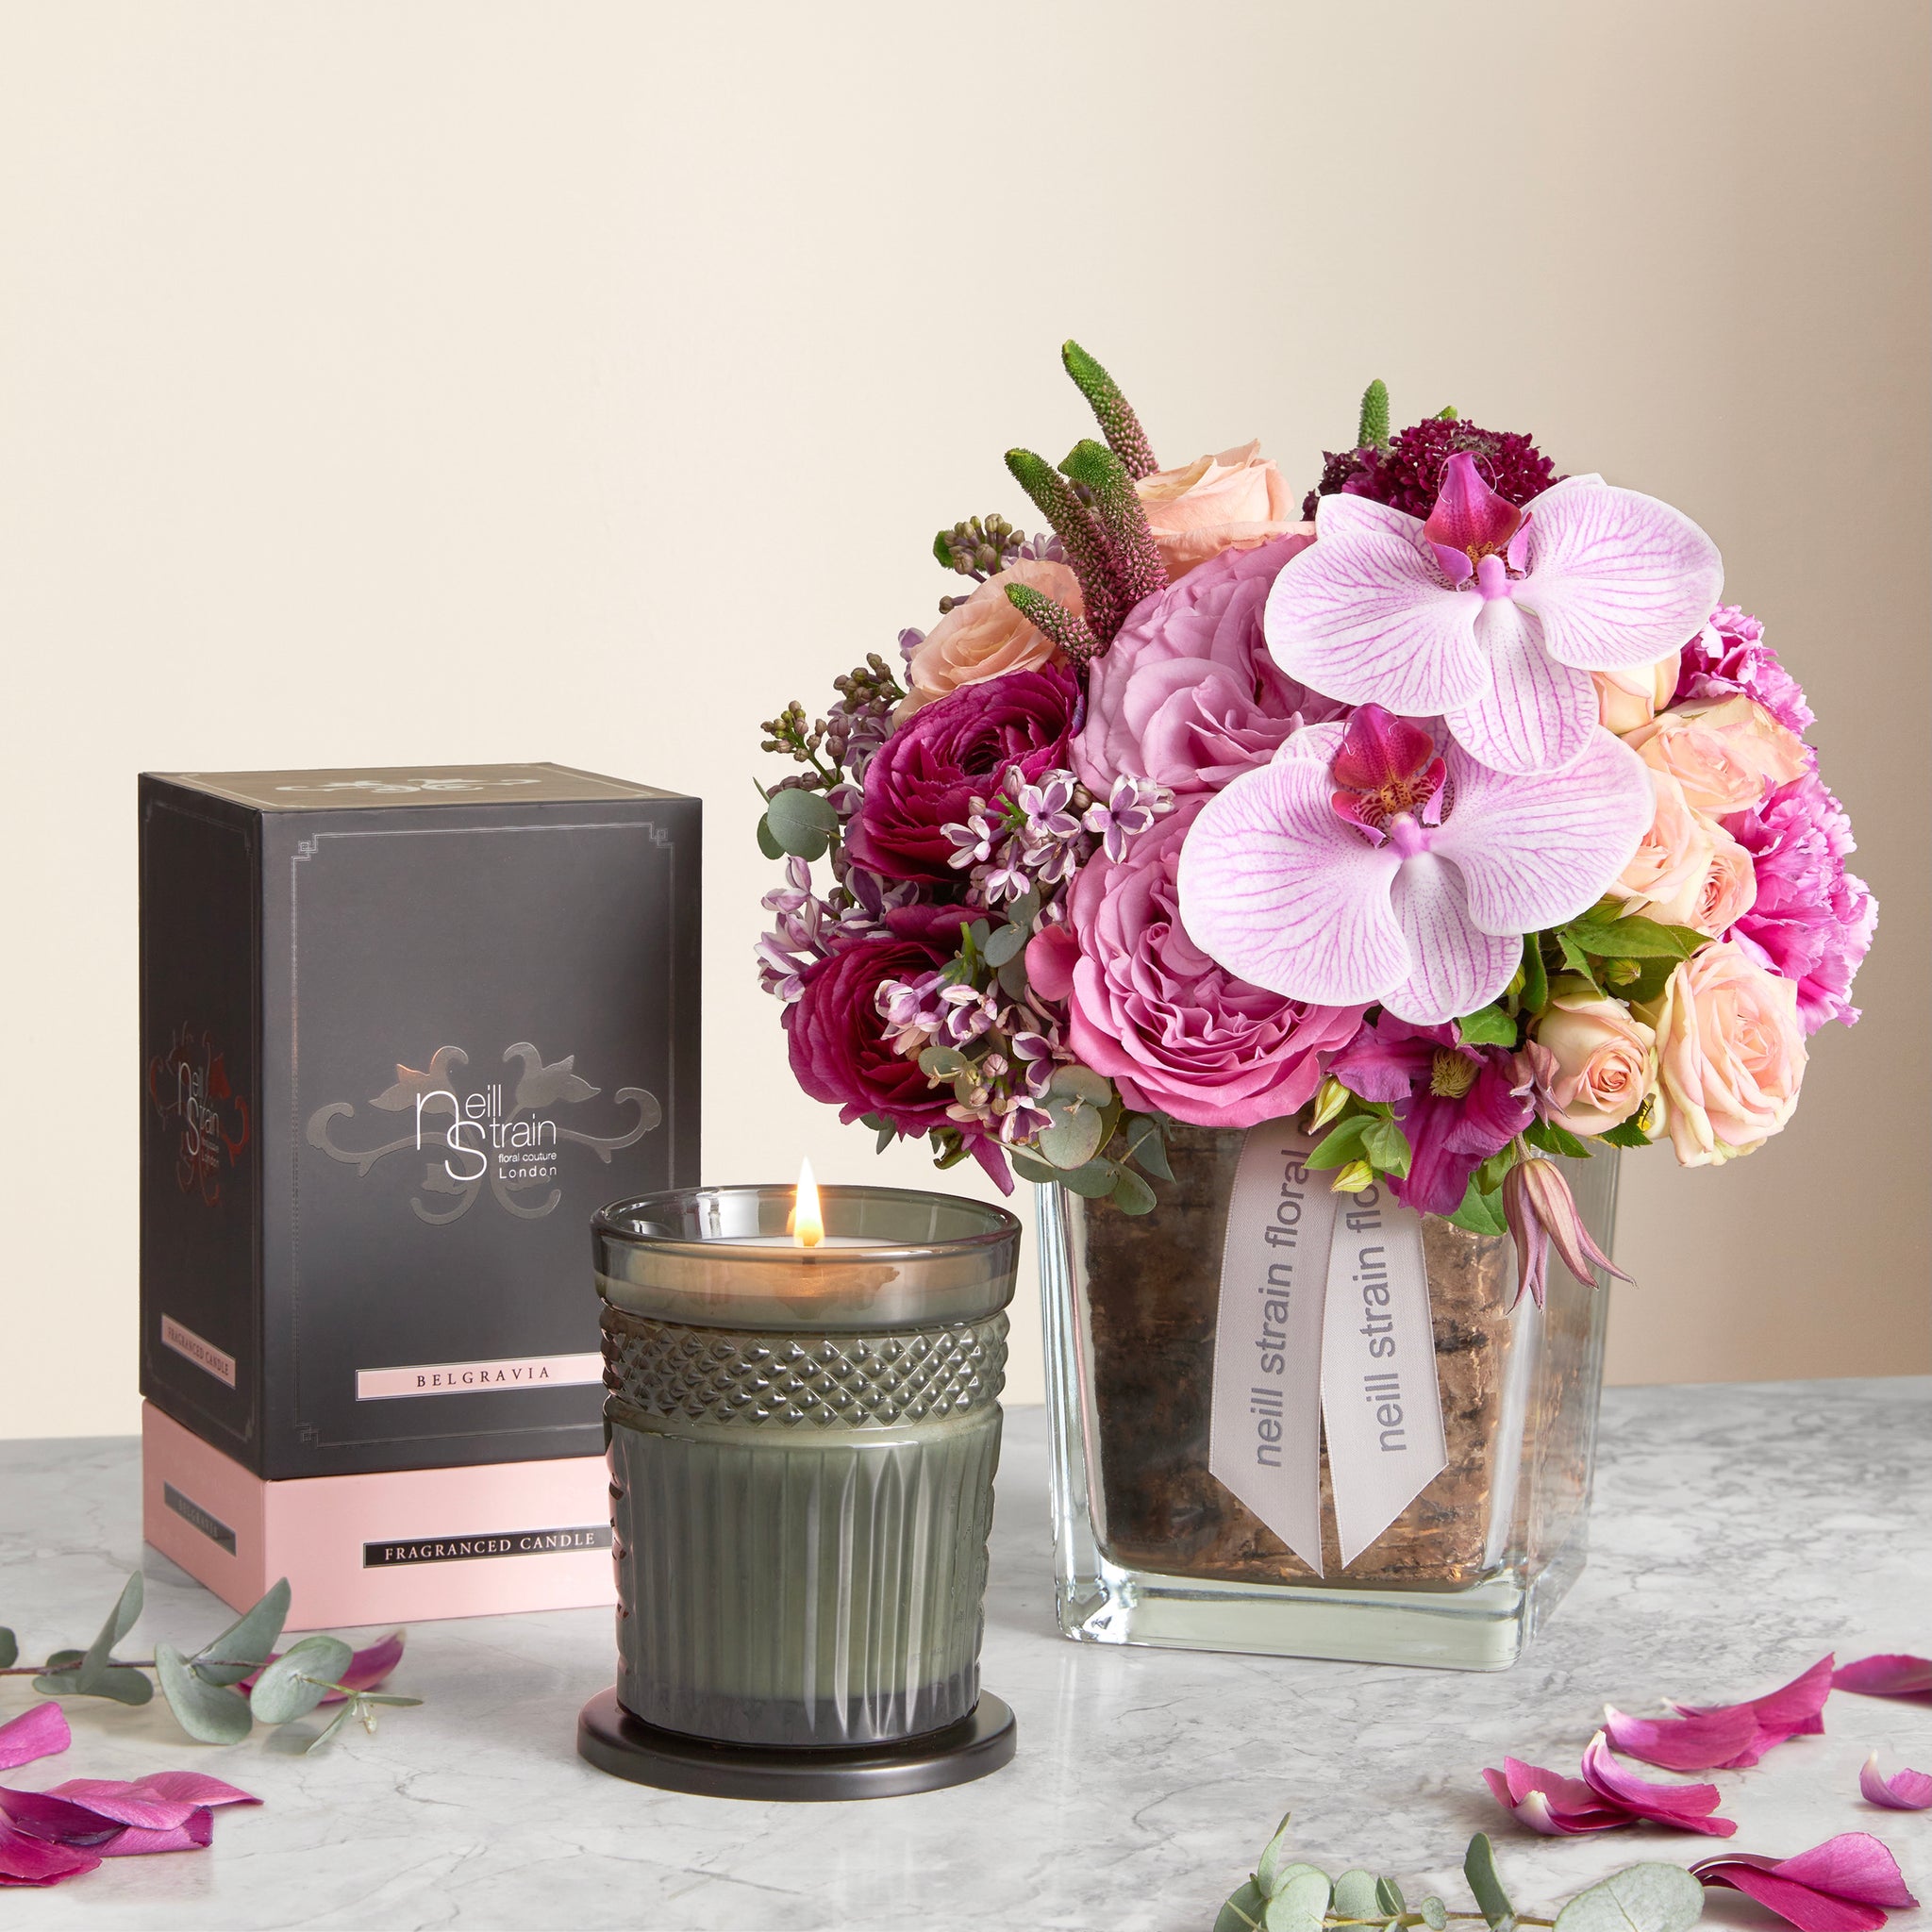 Neill Strain Floral Couture Mother's Day gift set